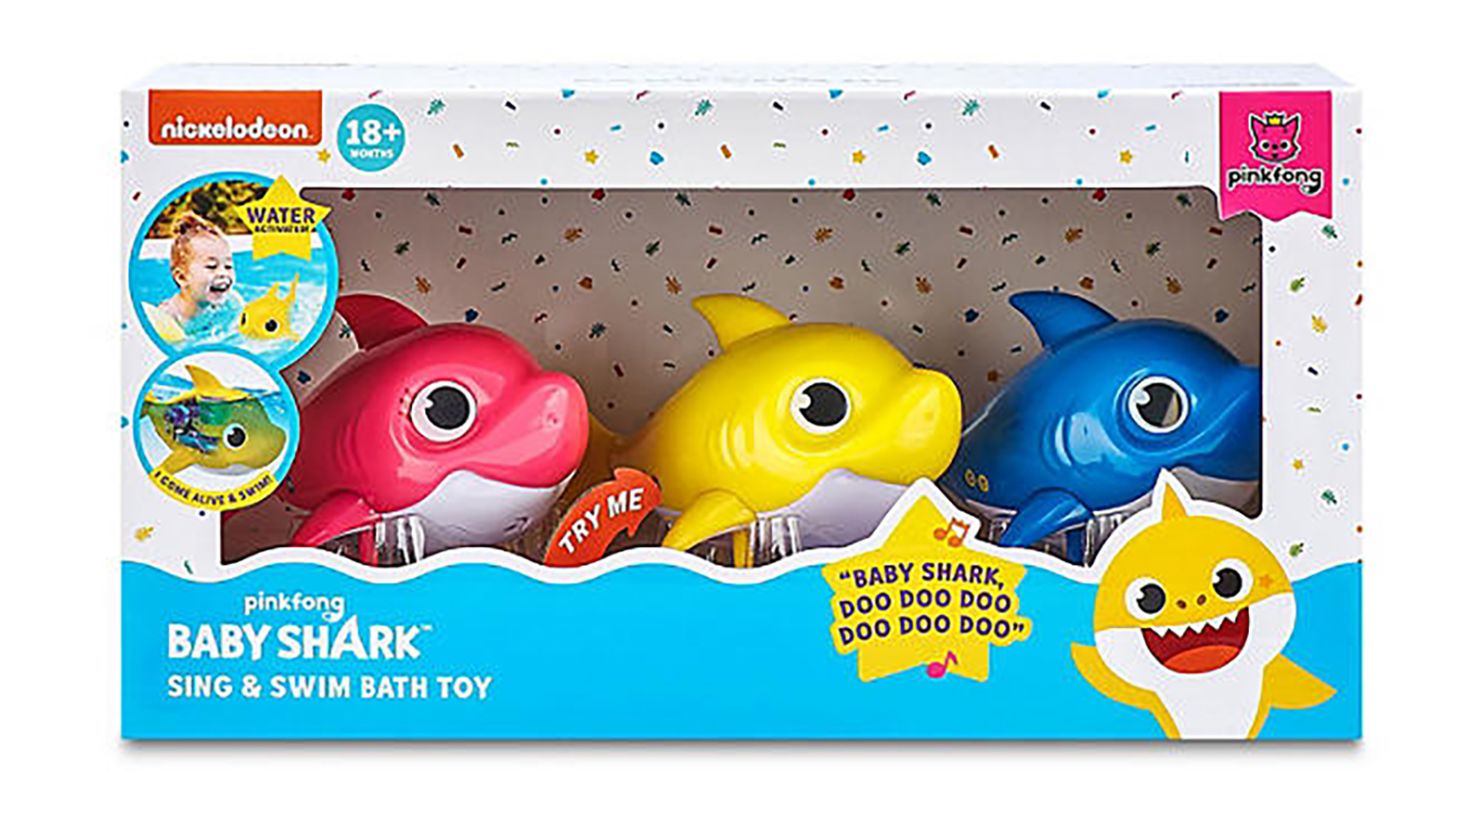 Toy maker recalls 7.5 million Baby Shark children's toys due to a